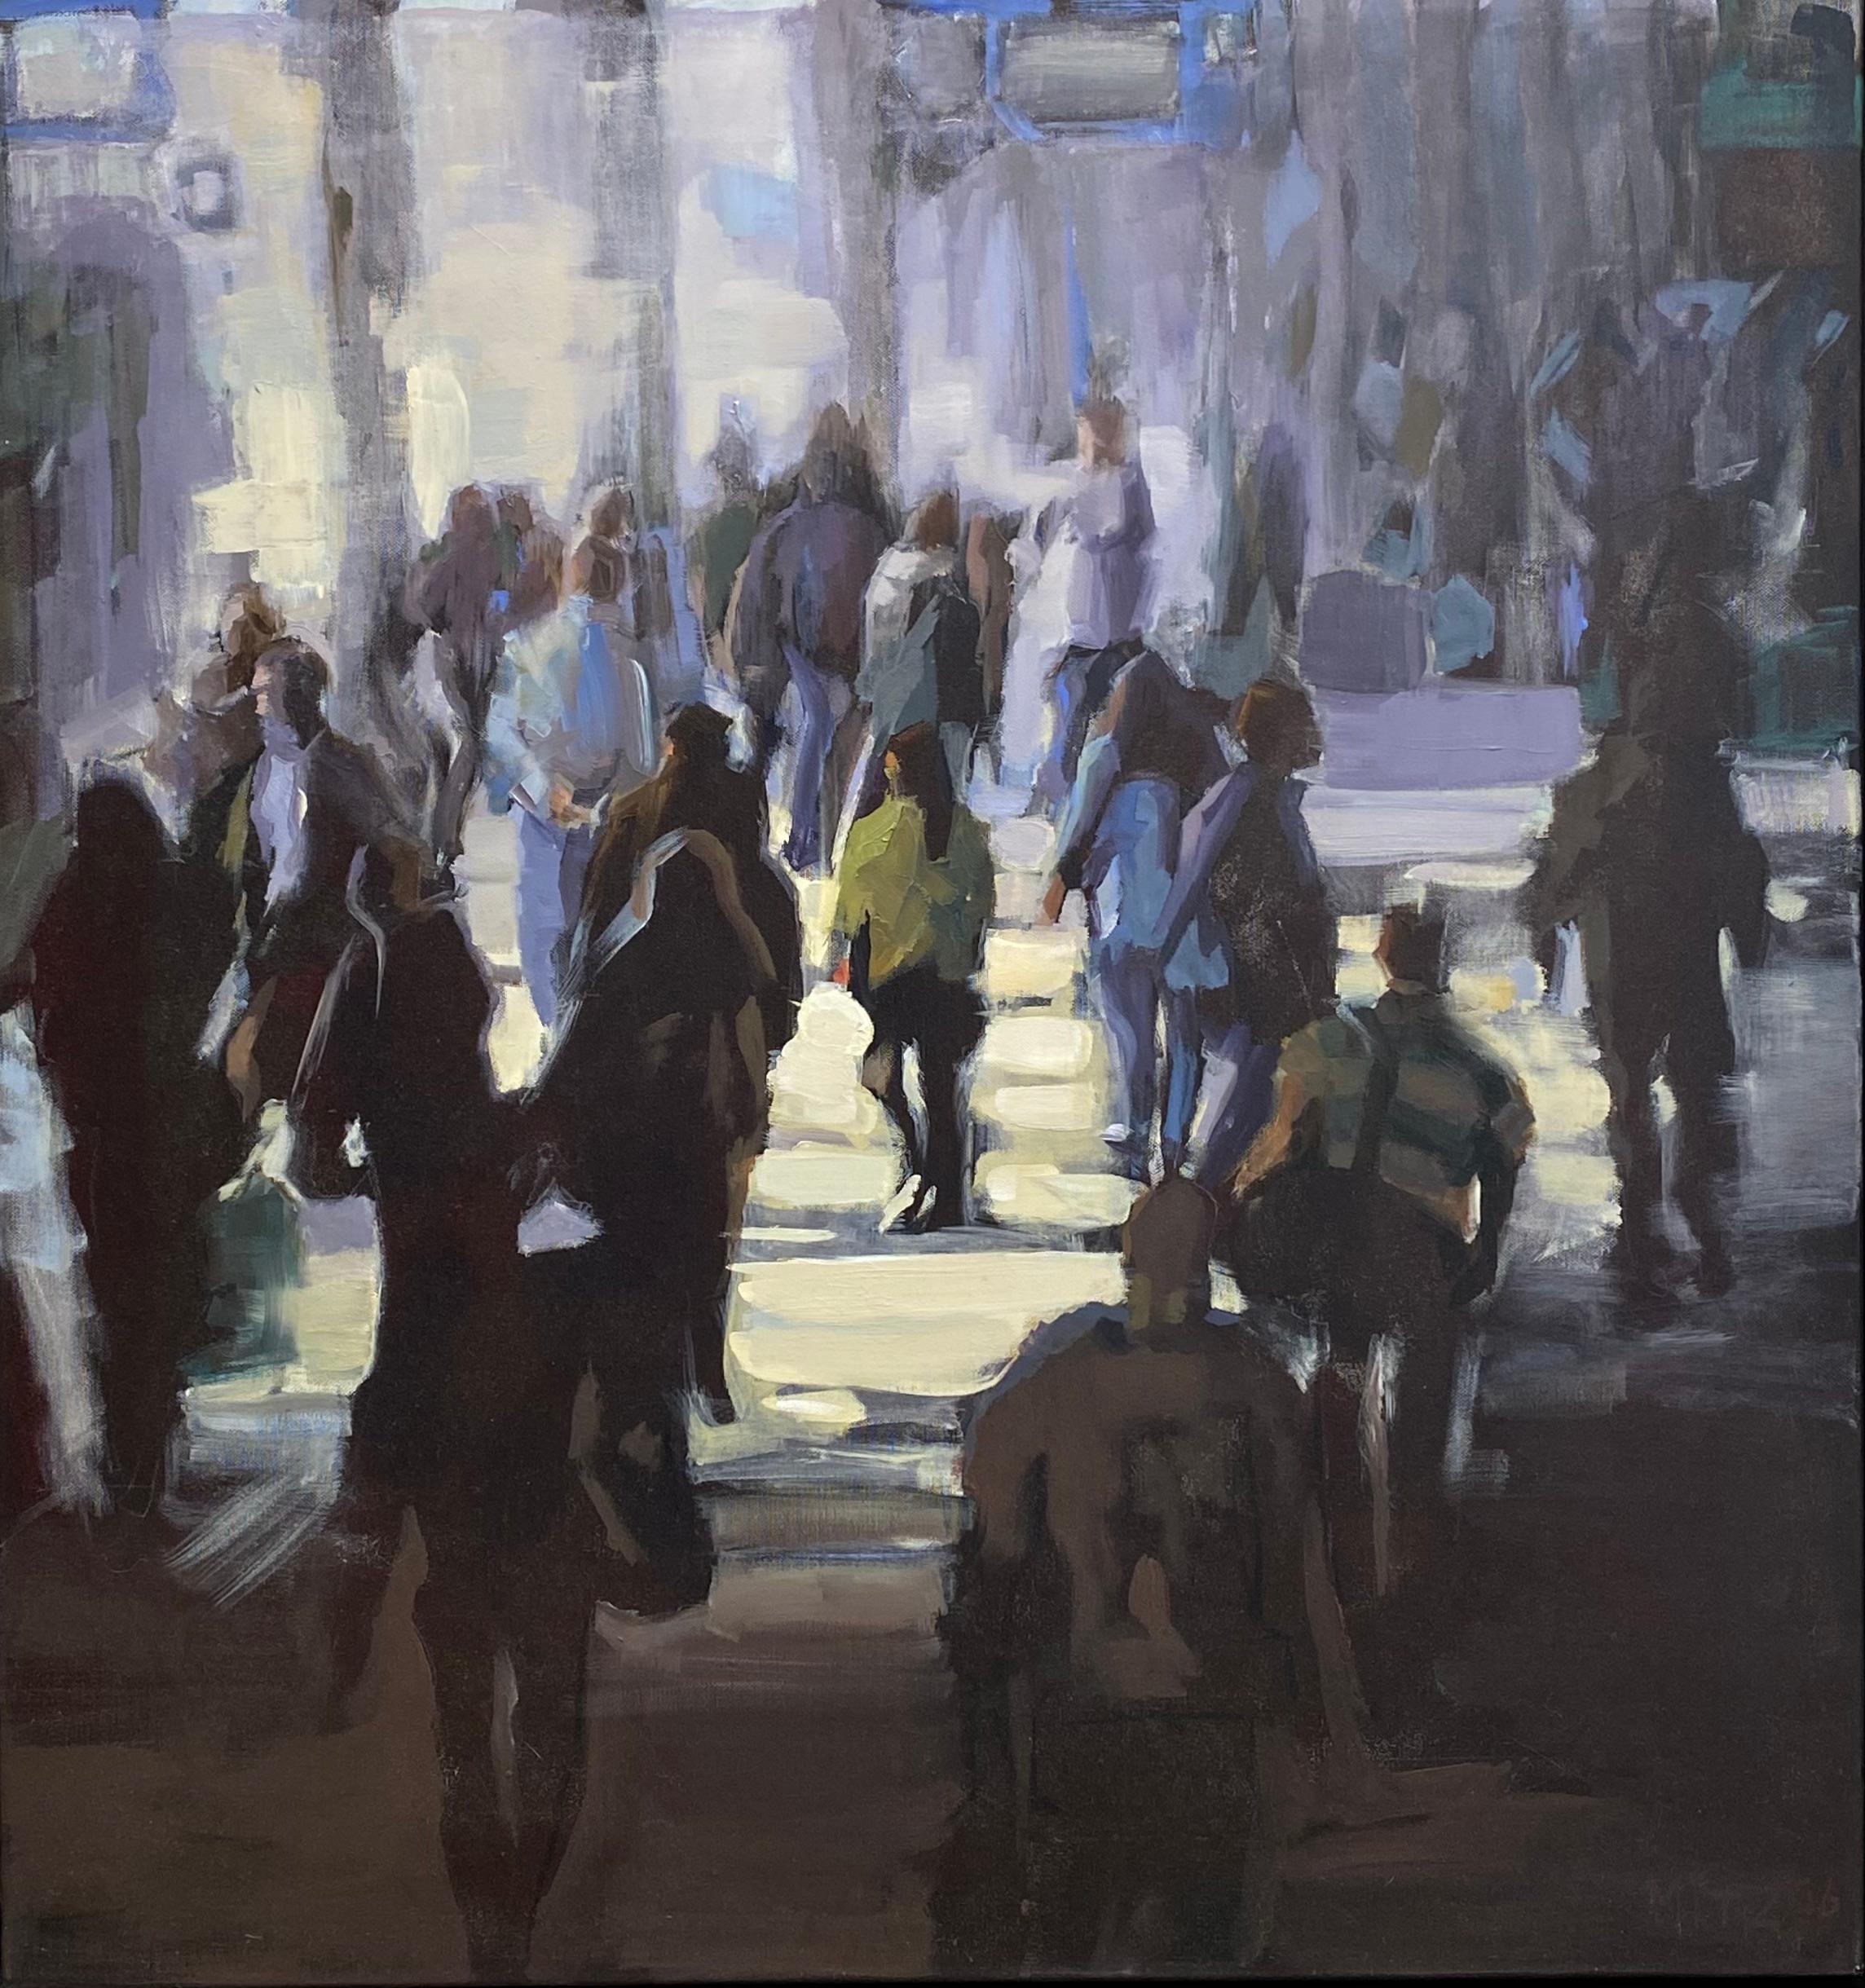 Crowd - 21st Century Contemporary Painting of a walking crowd